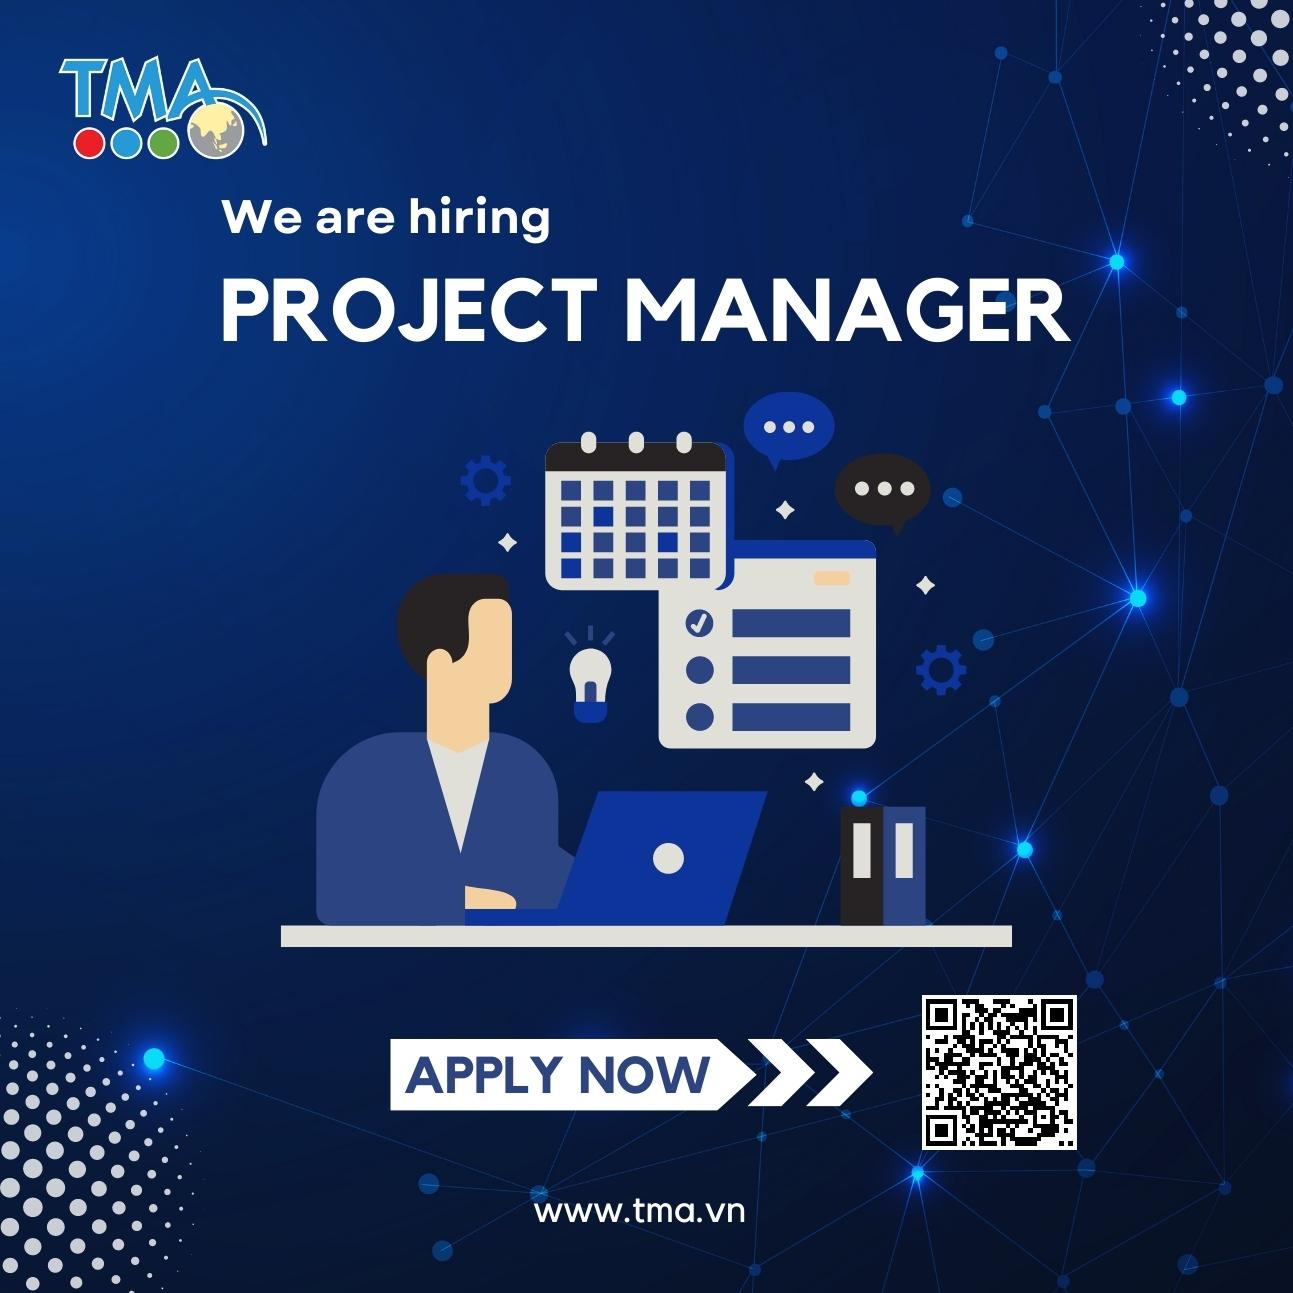 TMA tuyển dụng vị trí Project Manager